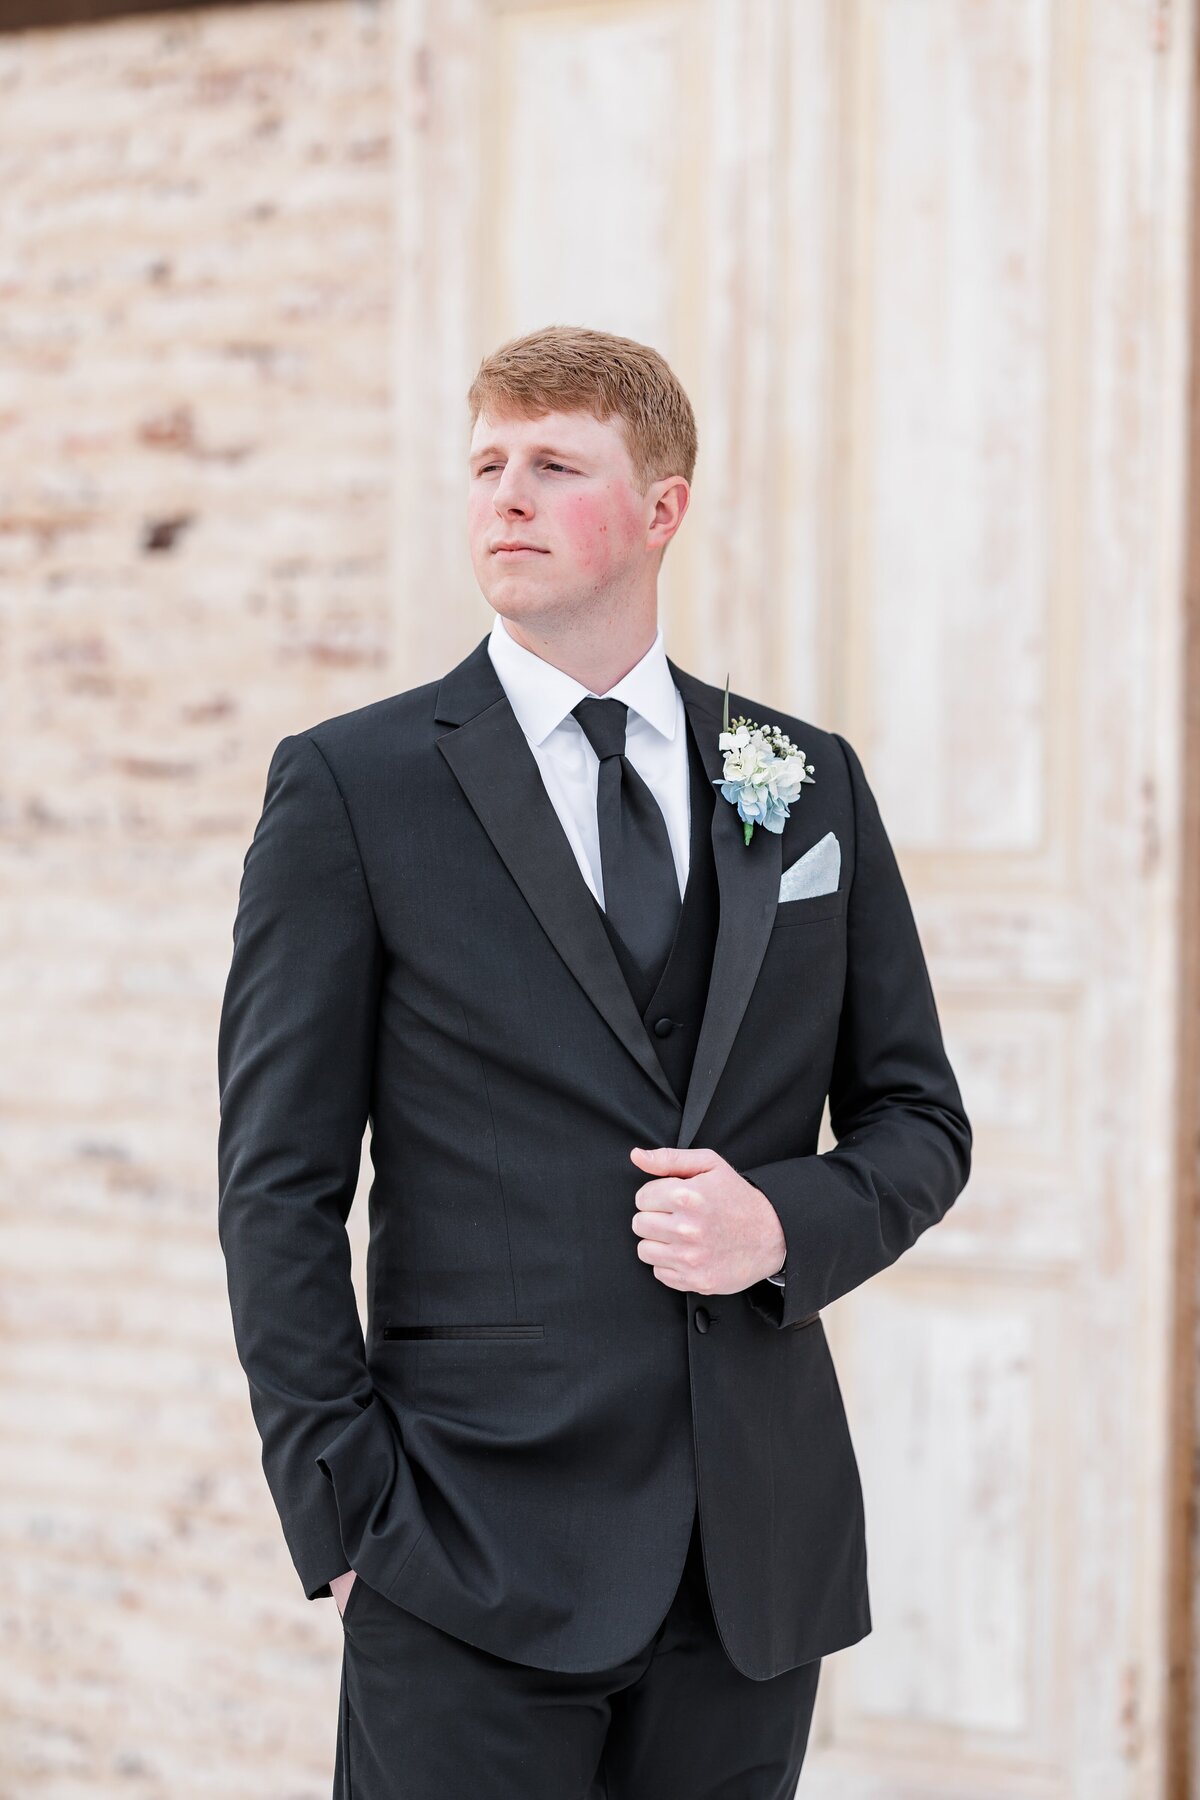 A tall groom in his black suit stands with his hand in his pocket and jacket coat off to the side over his shoulder.